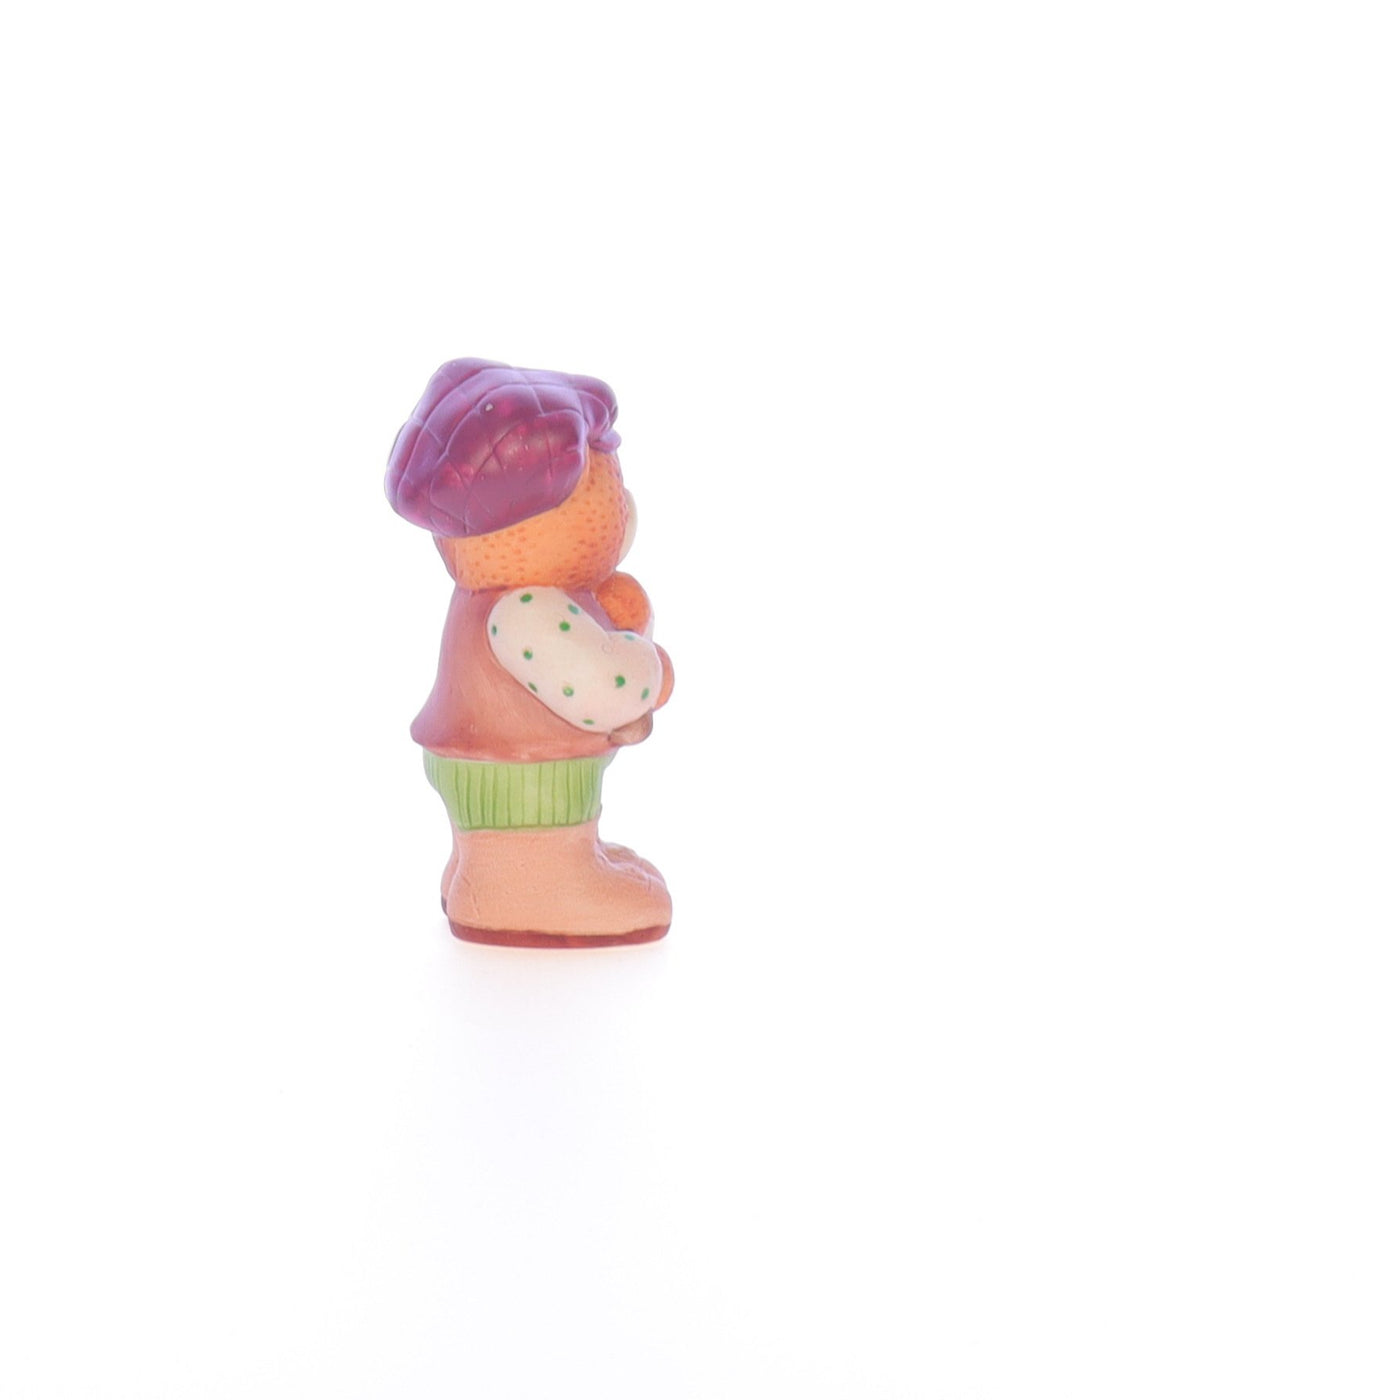 Lucy_And_Me_by_Lucy_Atwell_Porcelain_Figurine_Wood_Cutter_Bear_Lucy_Unknown_039_07